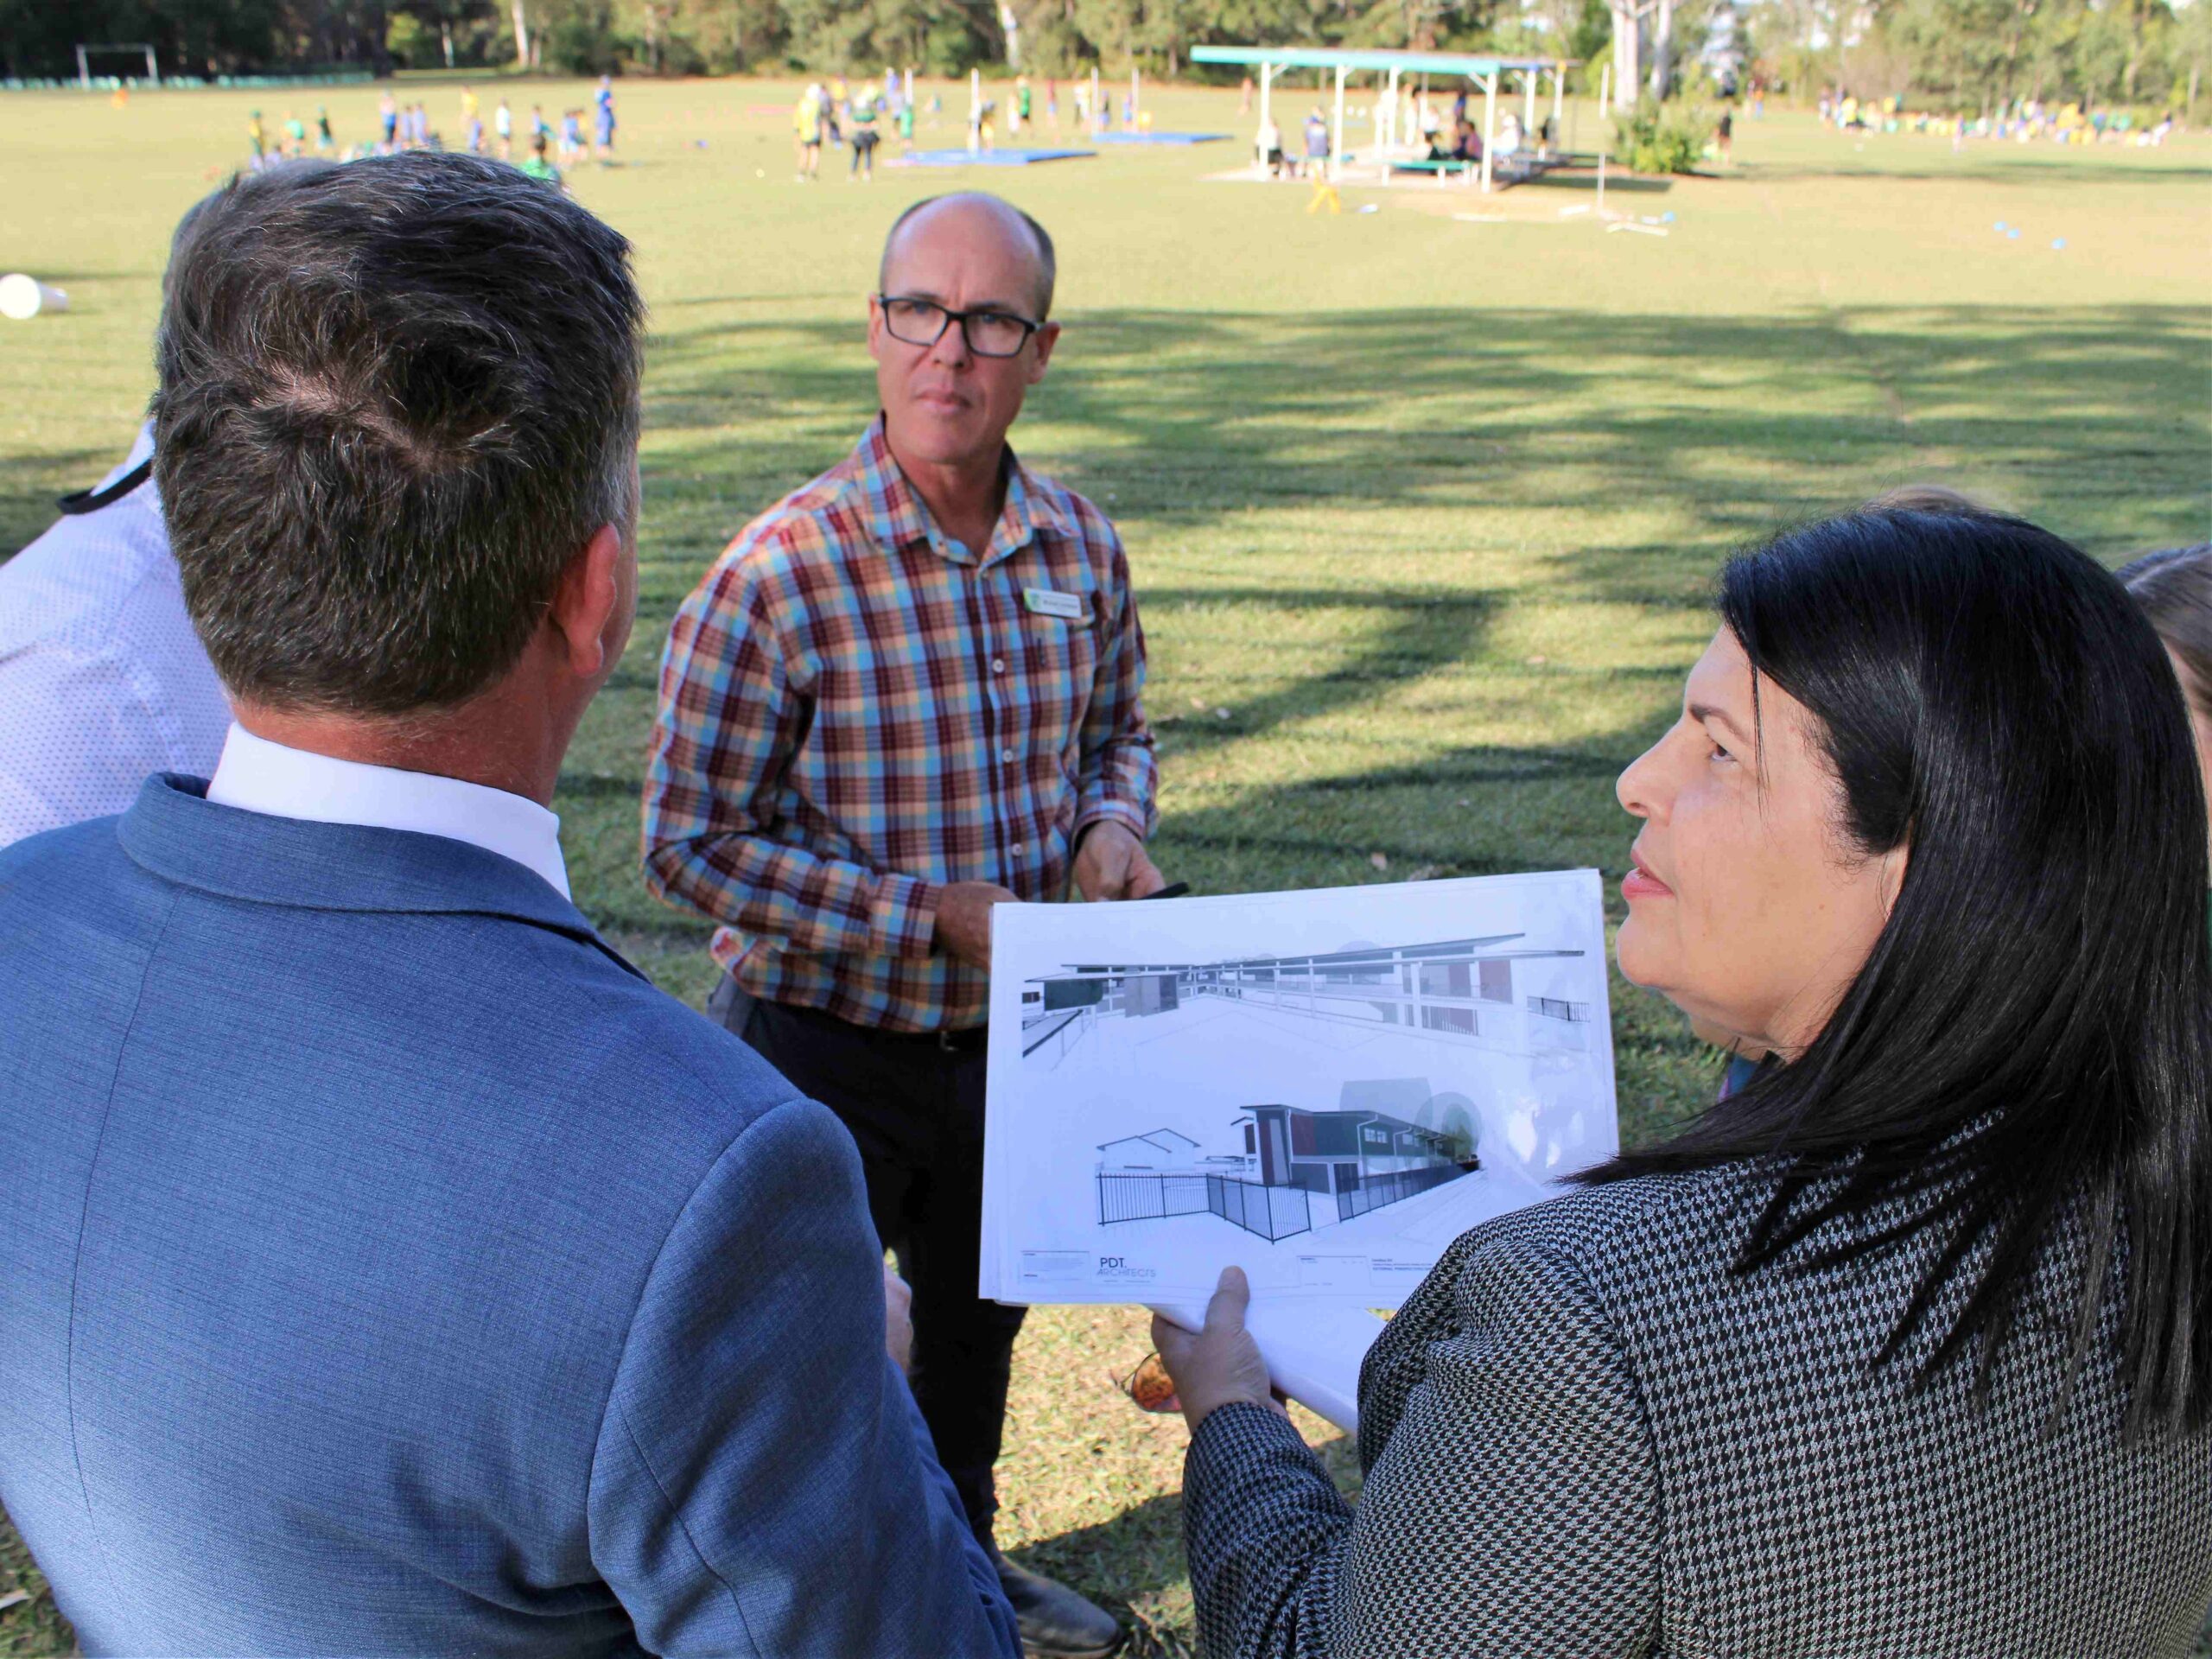 ‘Much-needed asset’: plans for $14.6m school hall revealed